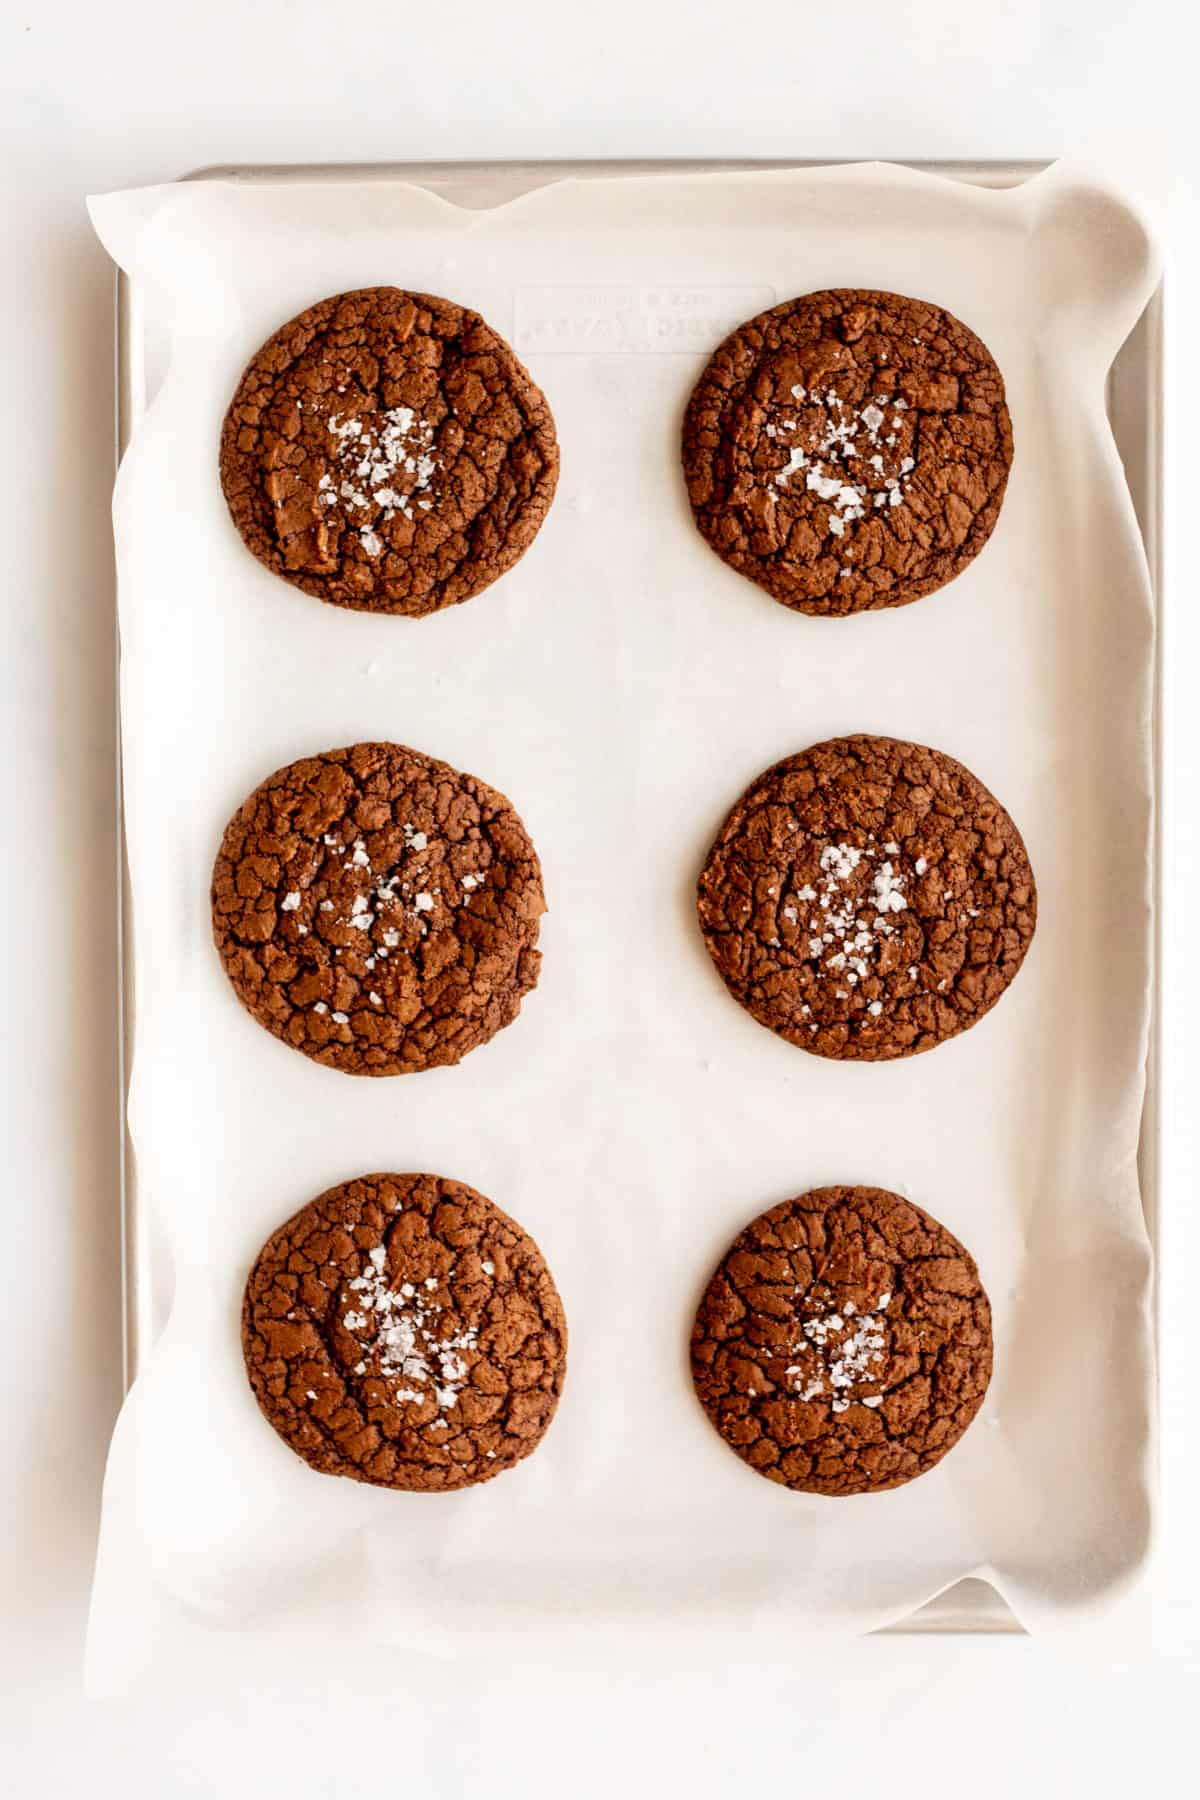 baked brownie cookies on a baking tray